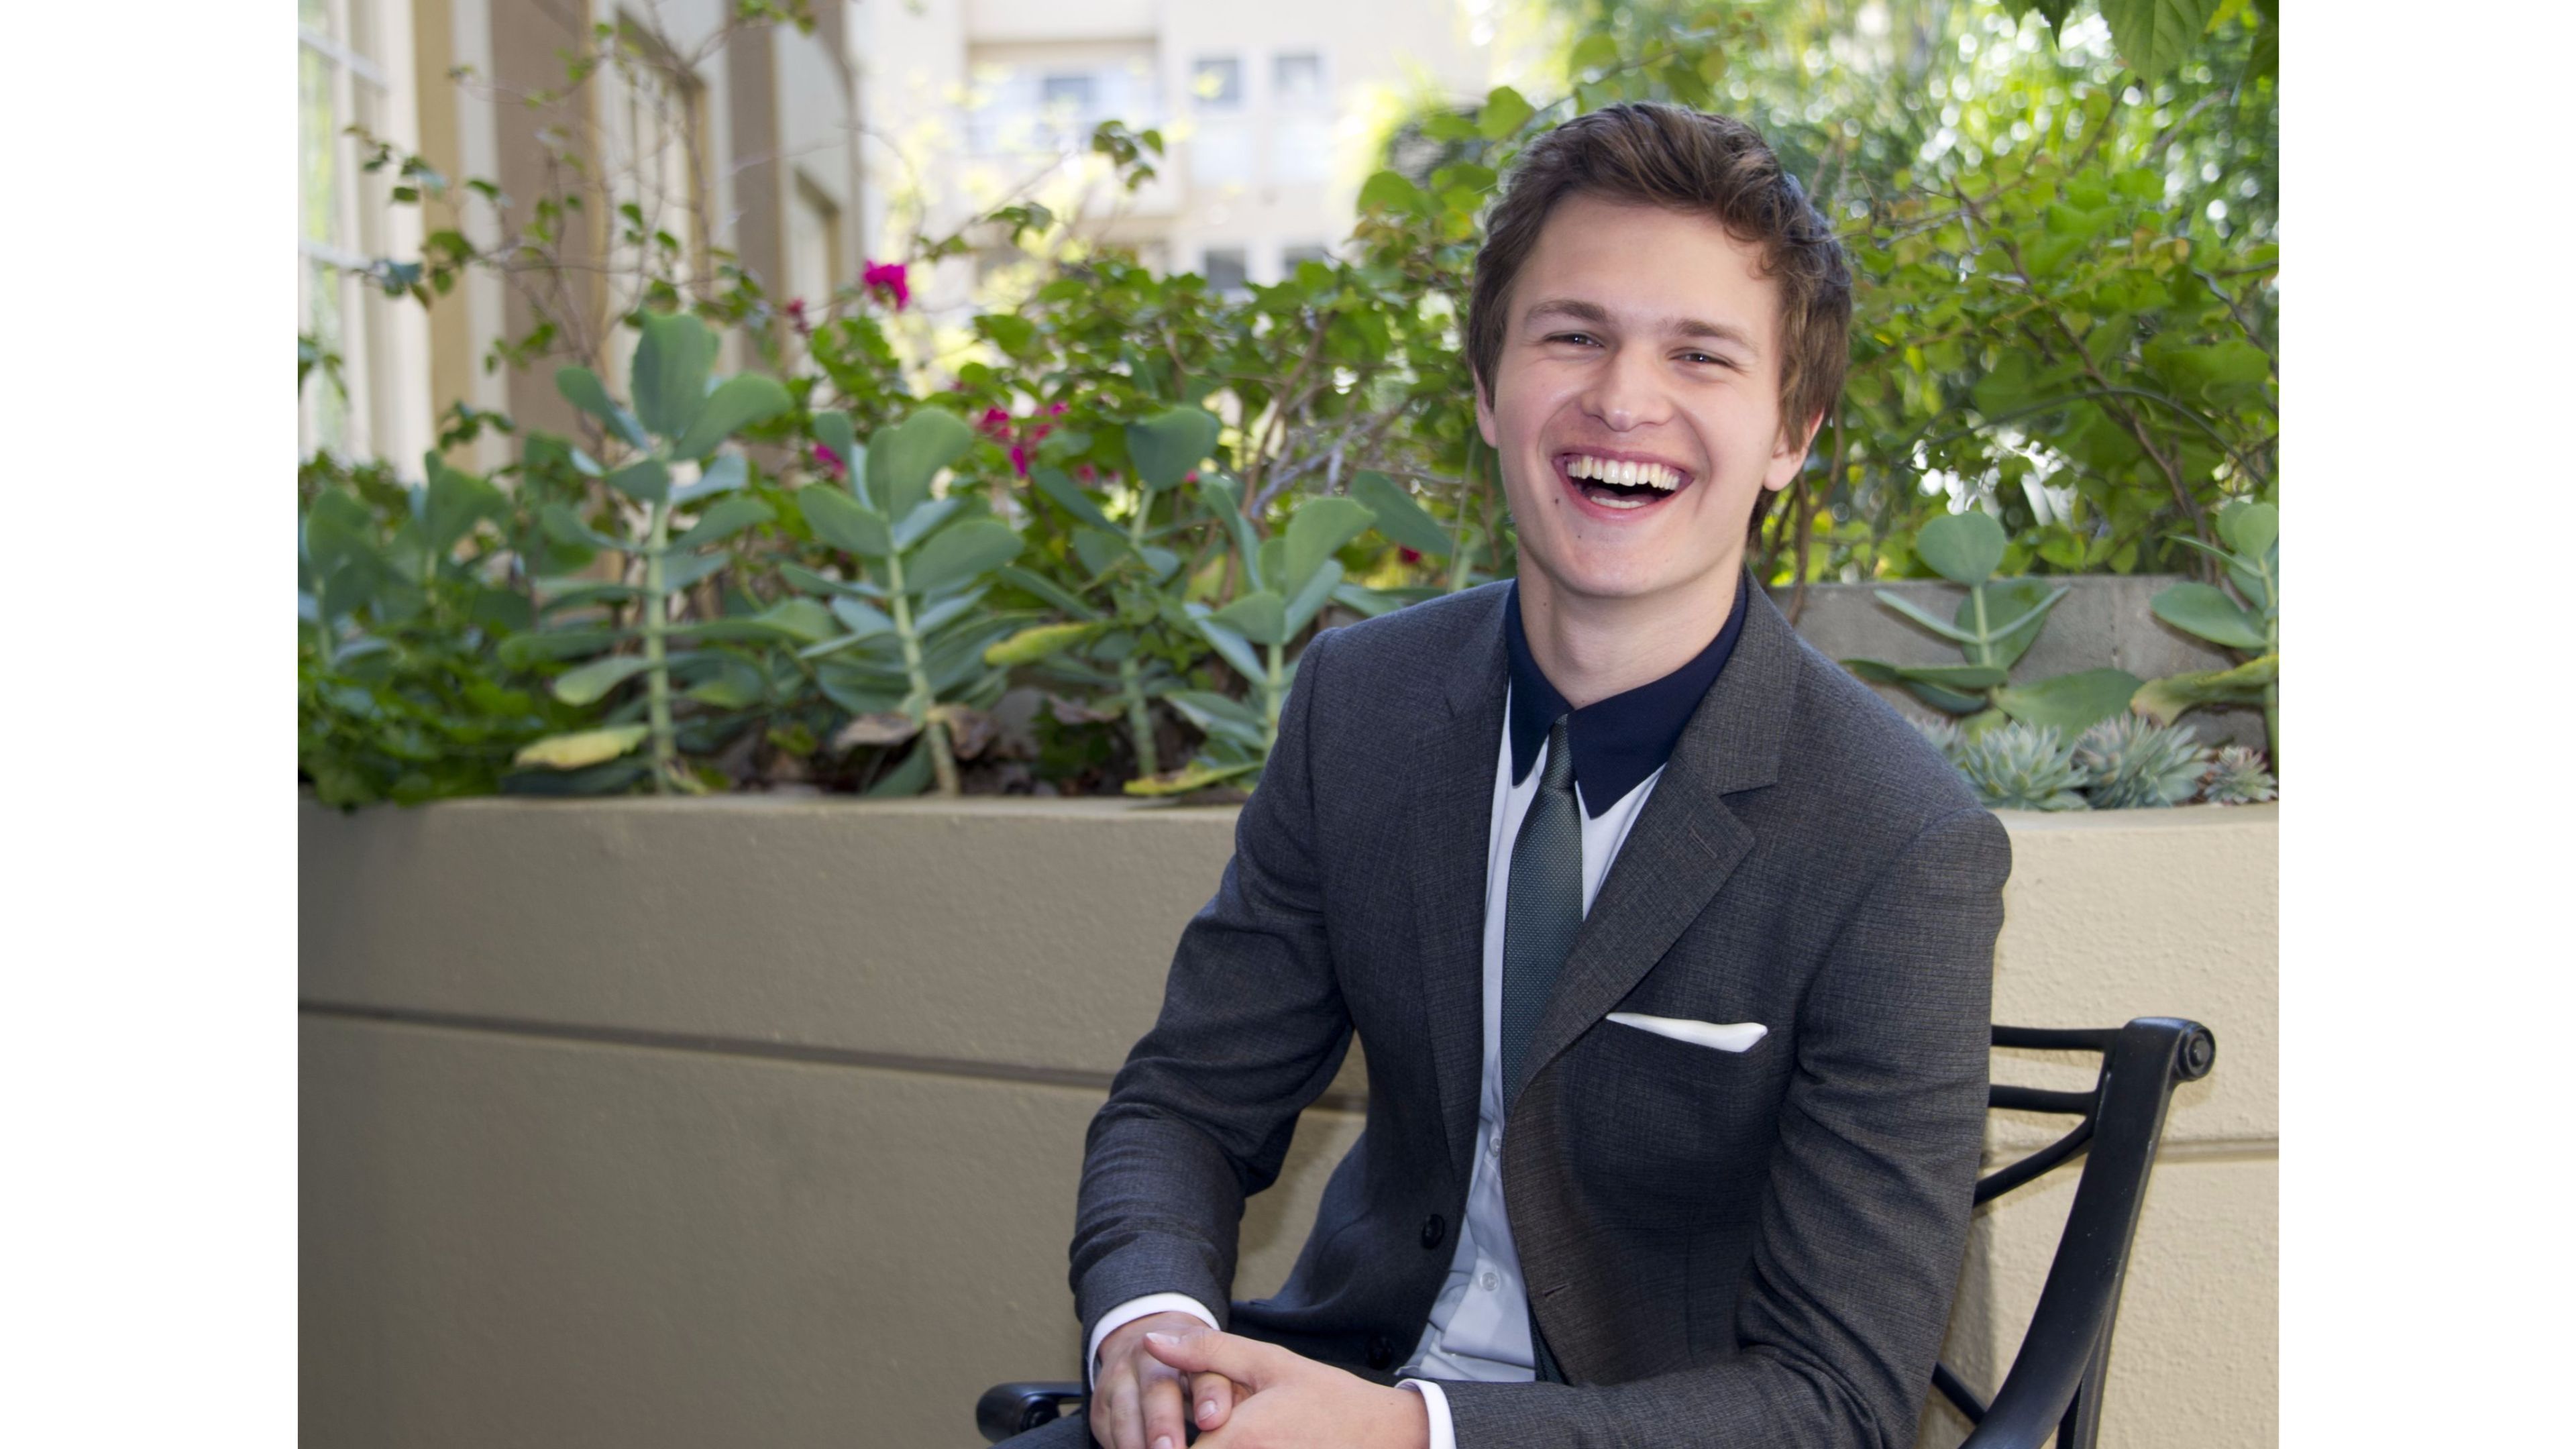 download actor ansel elgort smiling latest wallpapers